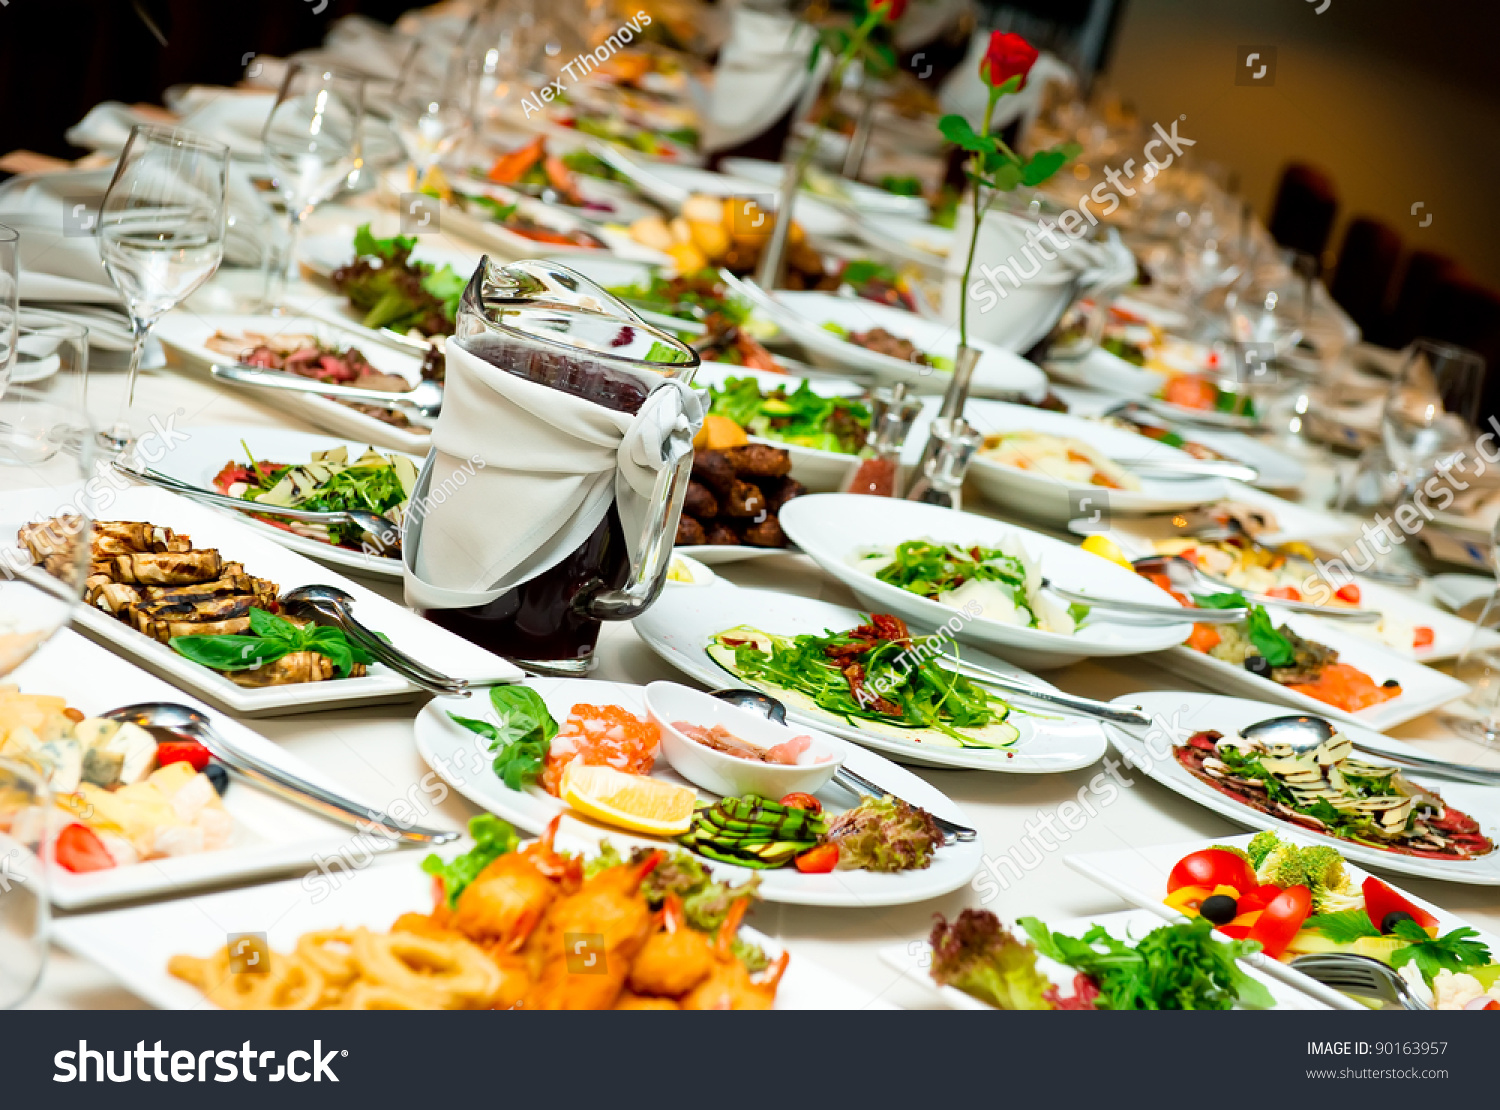 http://image.shutterstock.com/z/stock-photo-table-with-food-and-drink-90163957.jpg